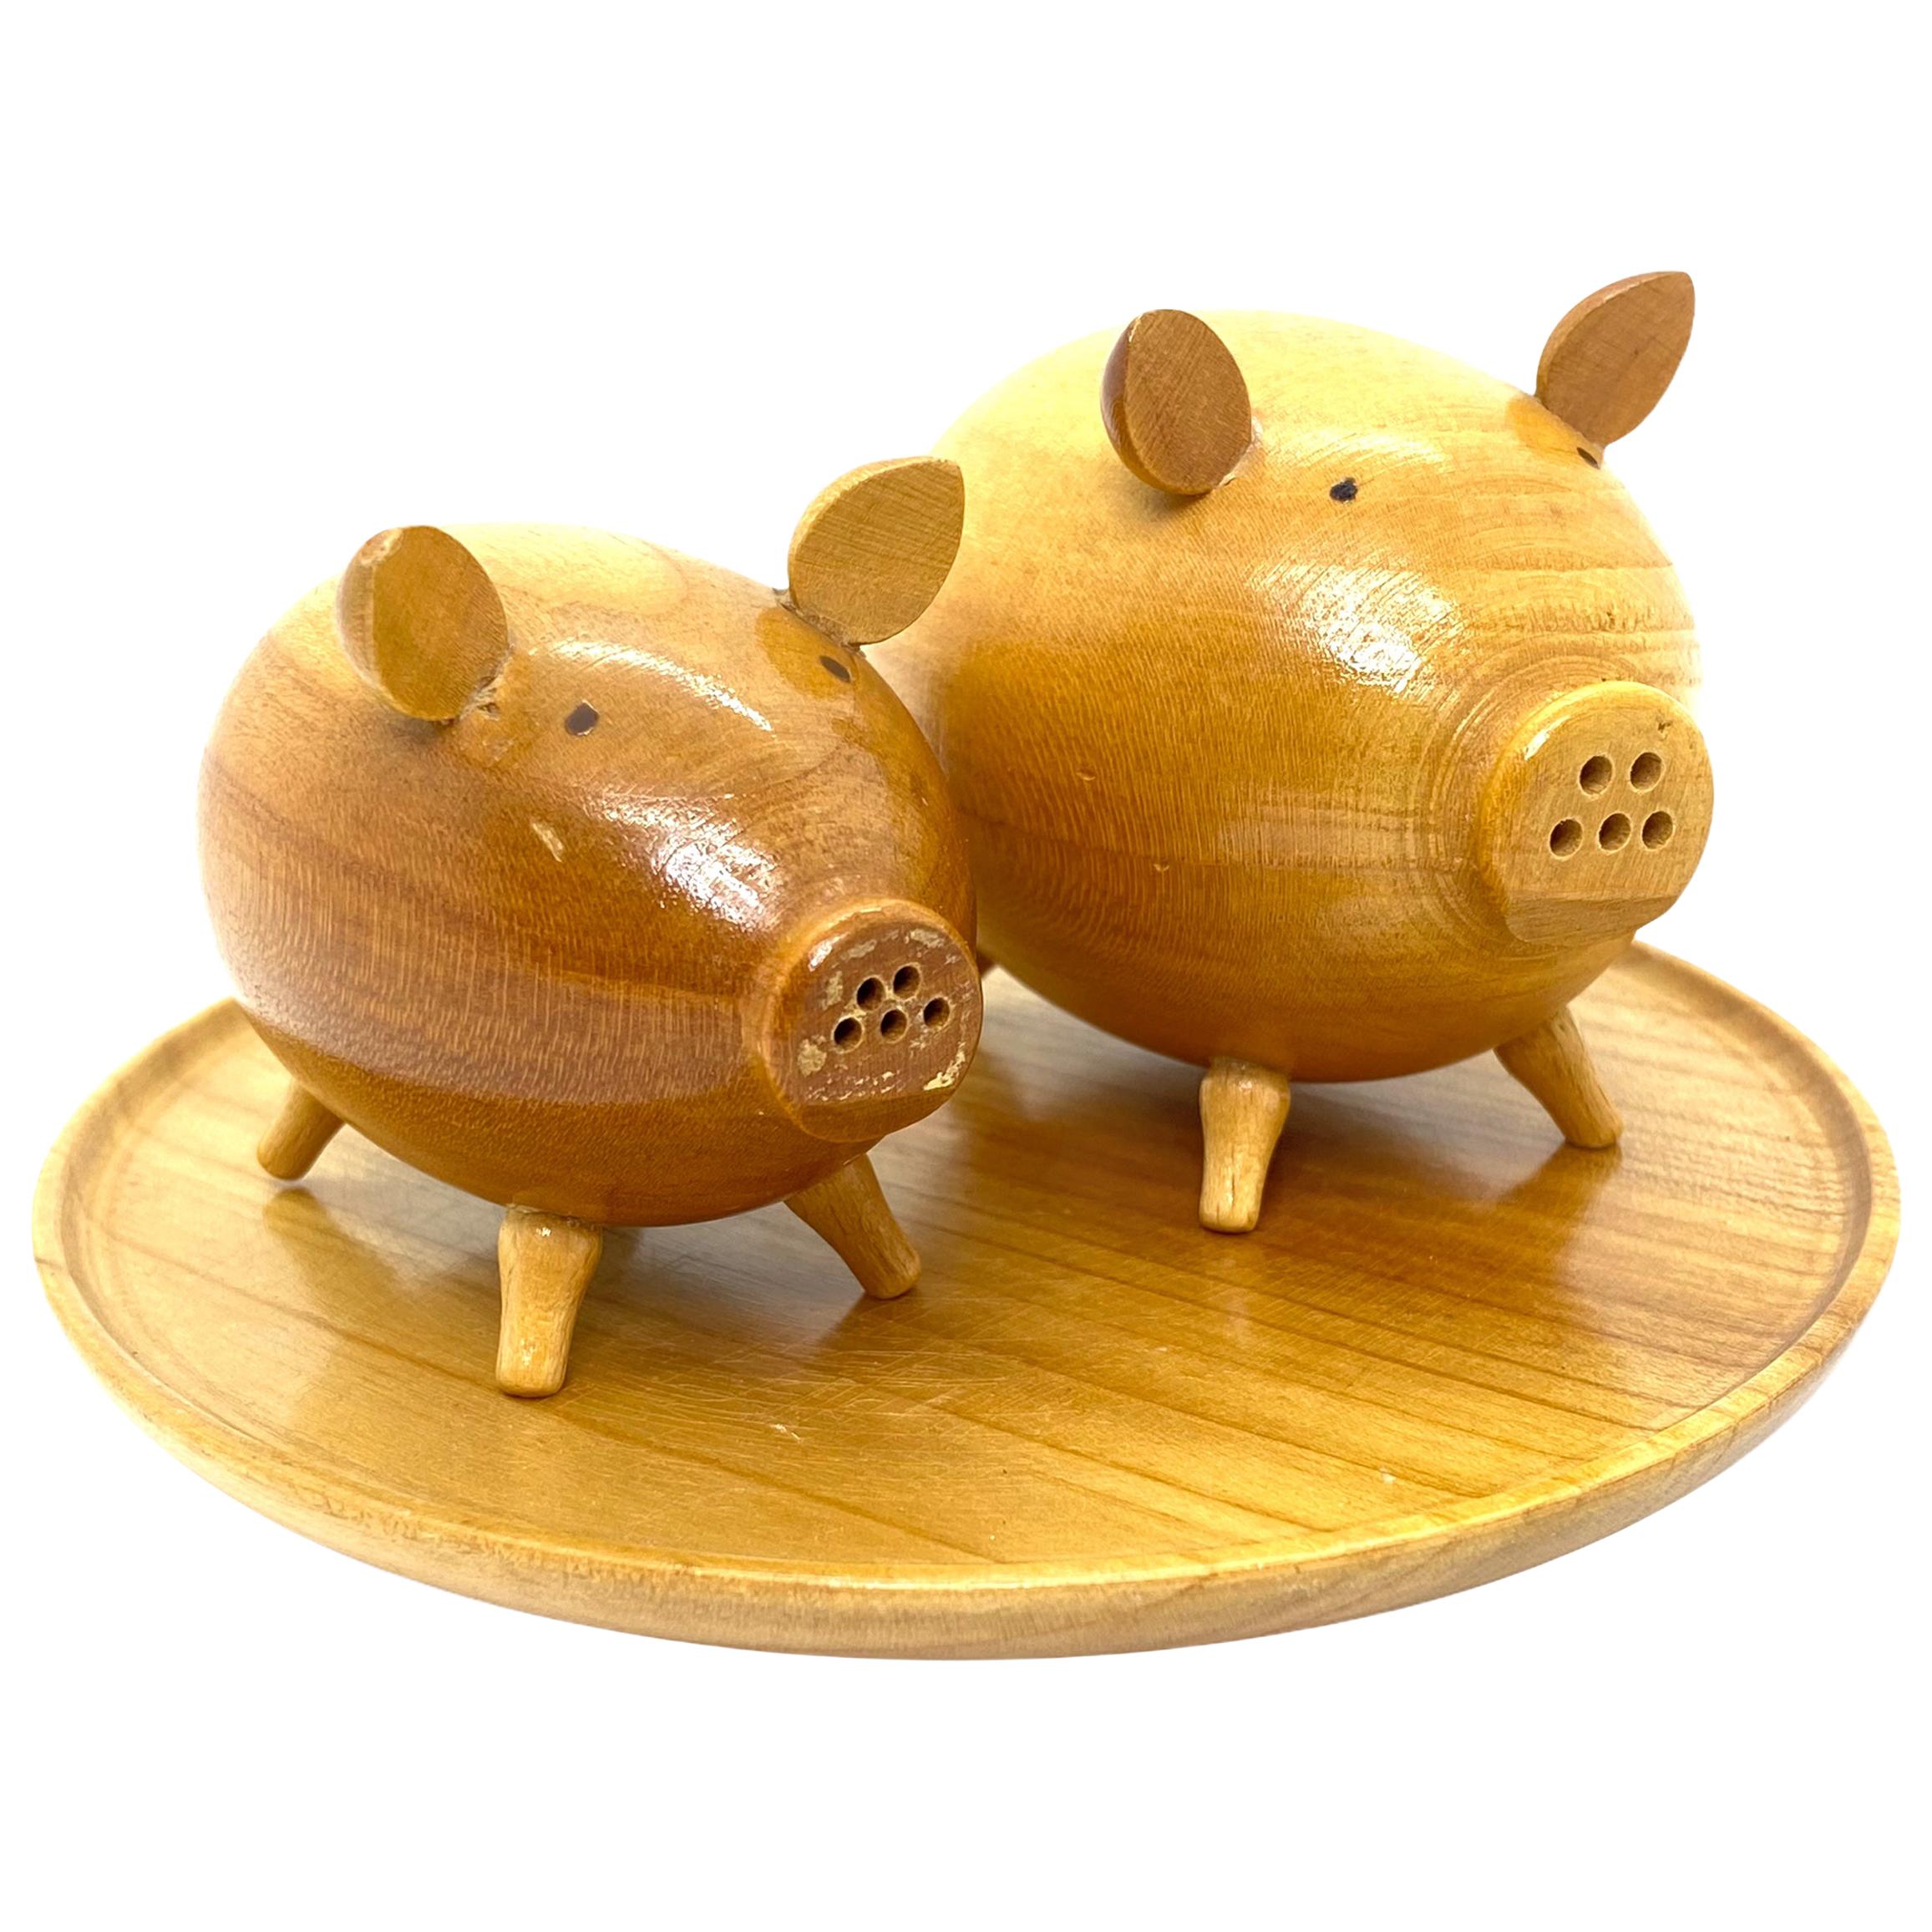 Two Salt and Paper Shaker Pigs on Tray, Wood Danish Design, 1960s